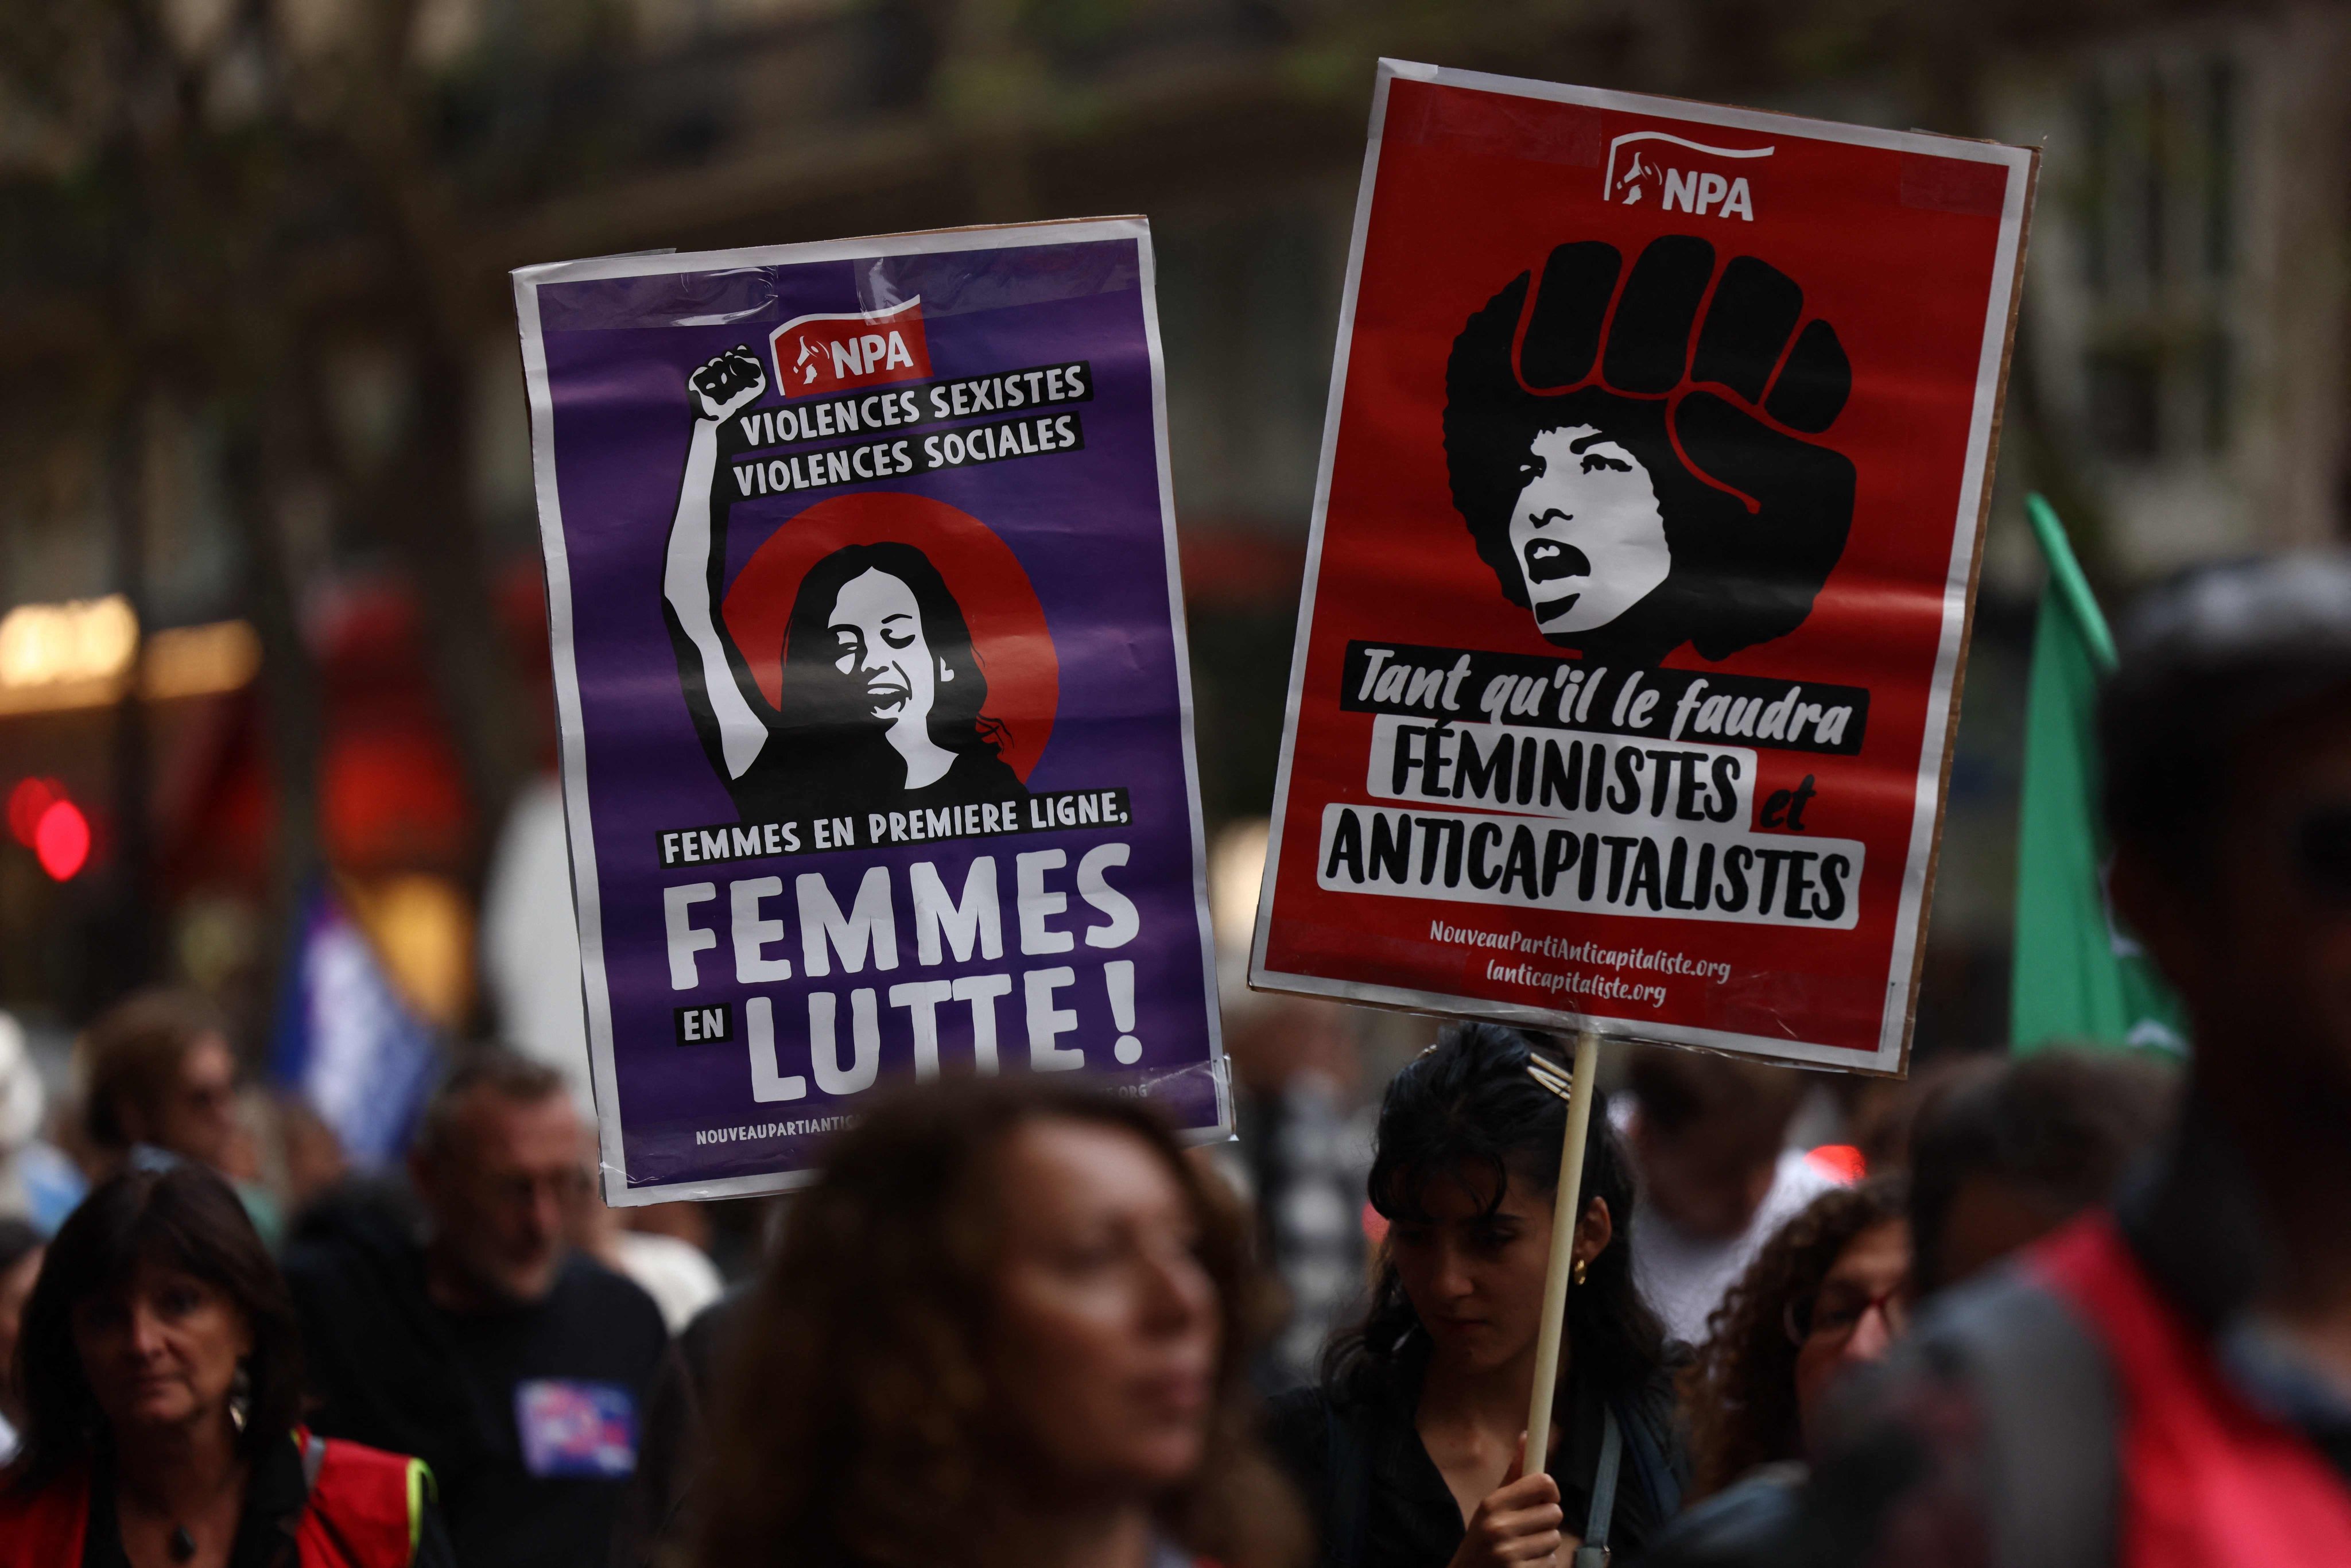 A rally on International Safe Abortion Day in Paris in September. Photo: AFP